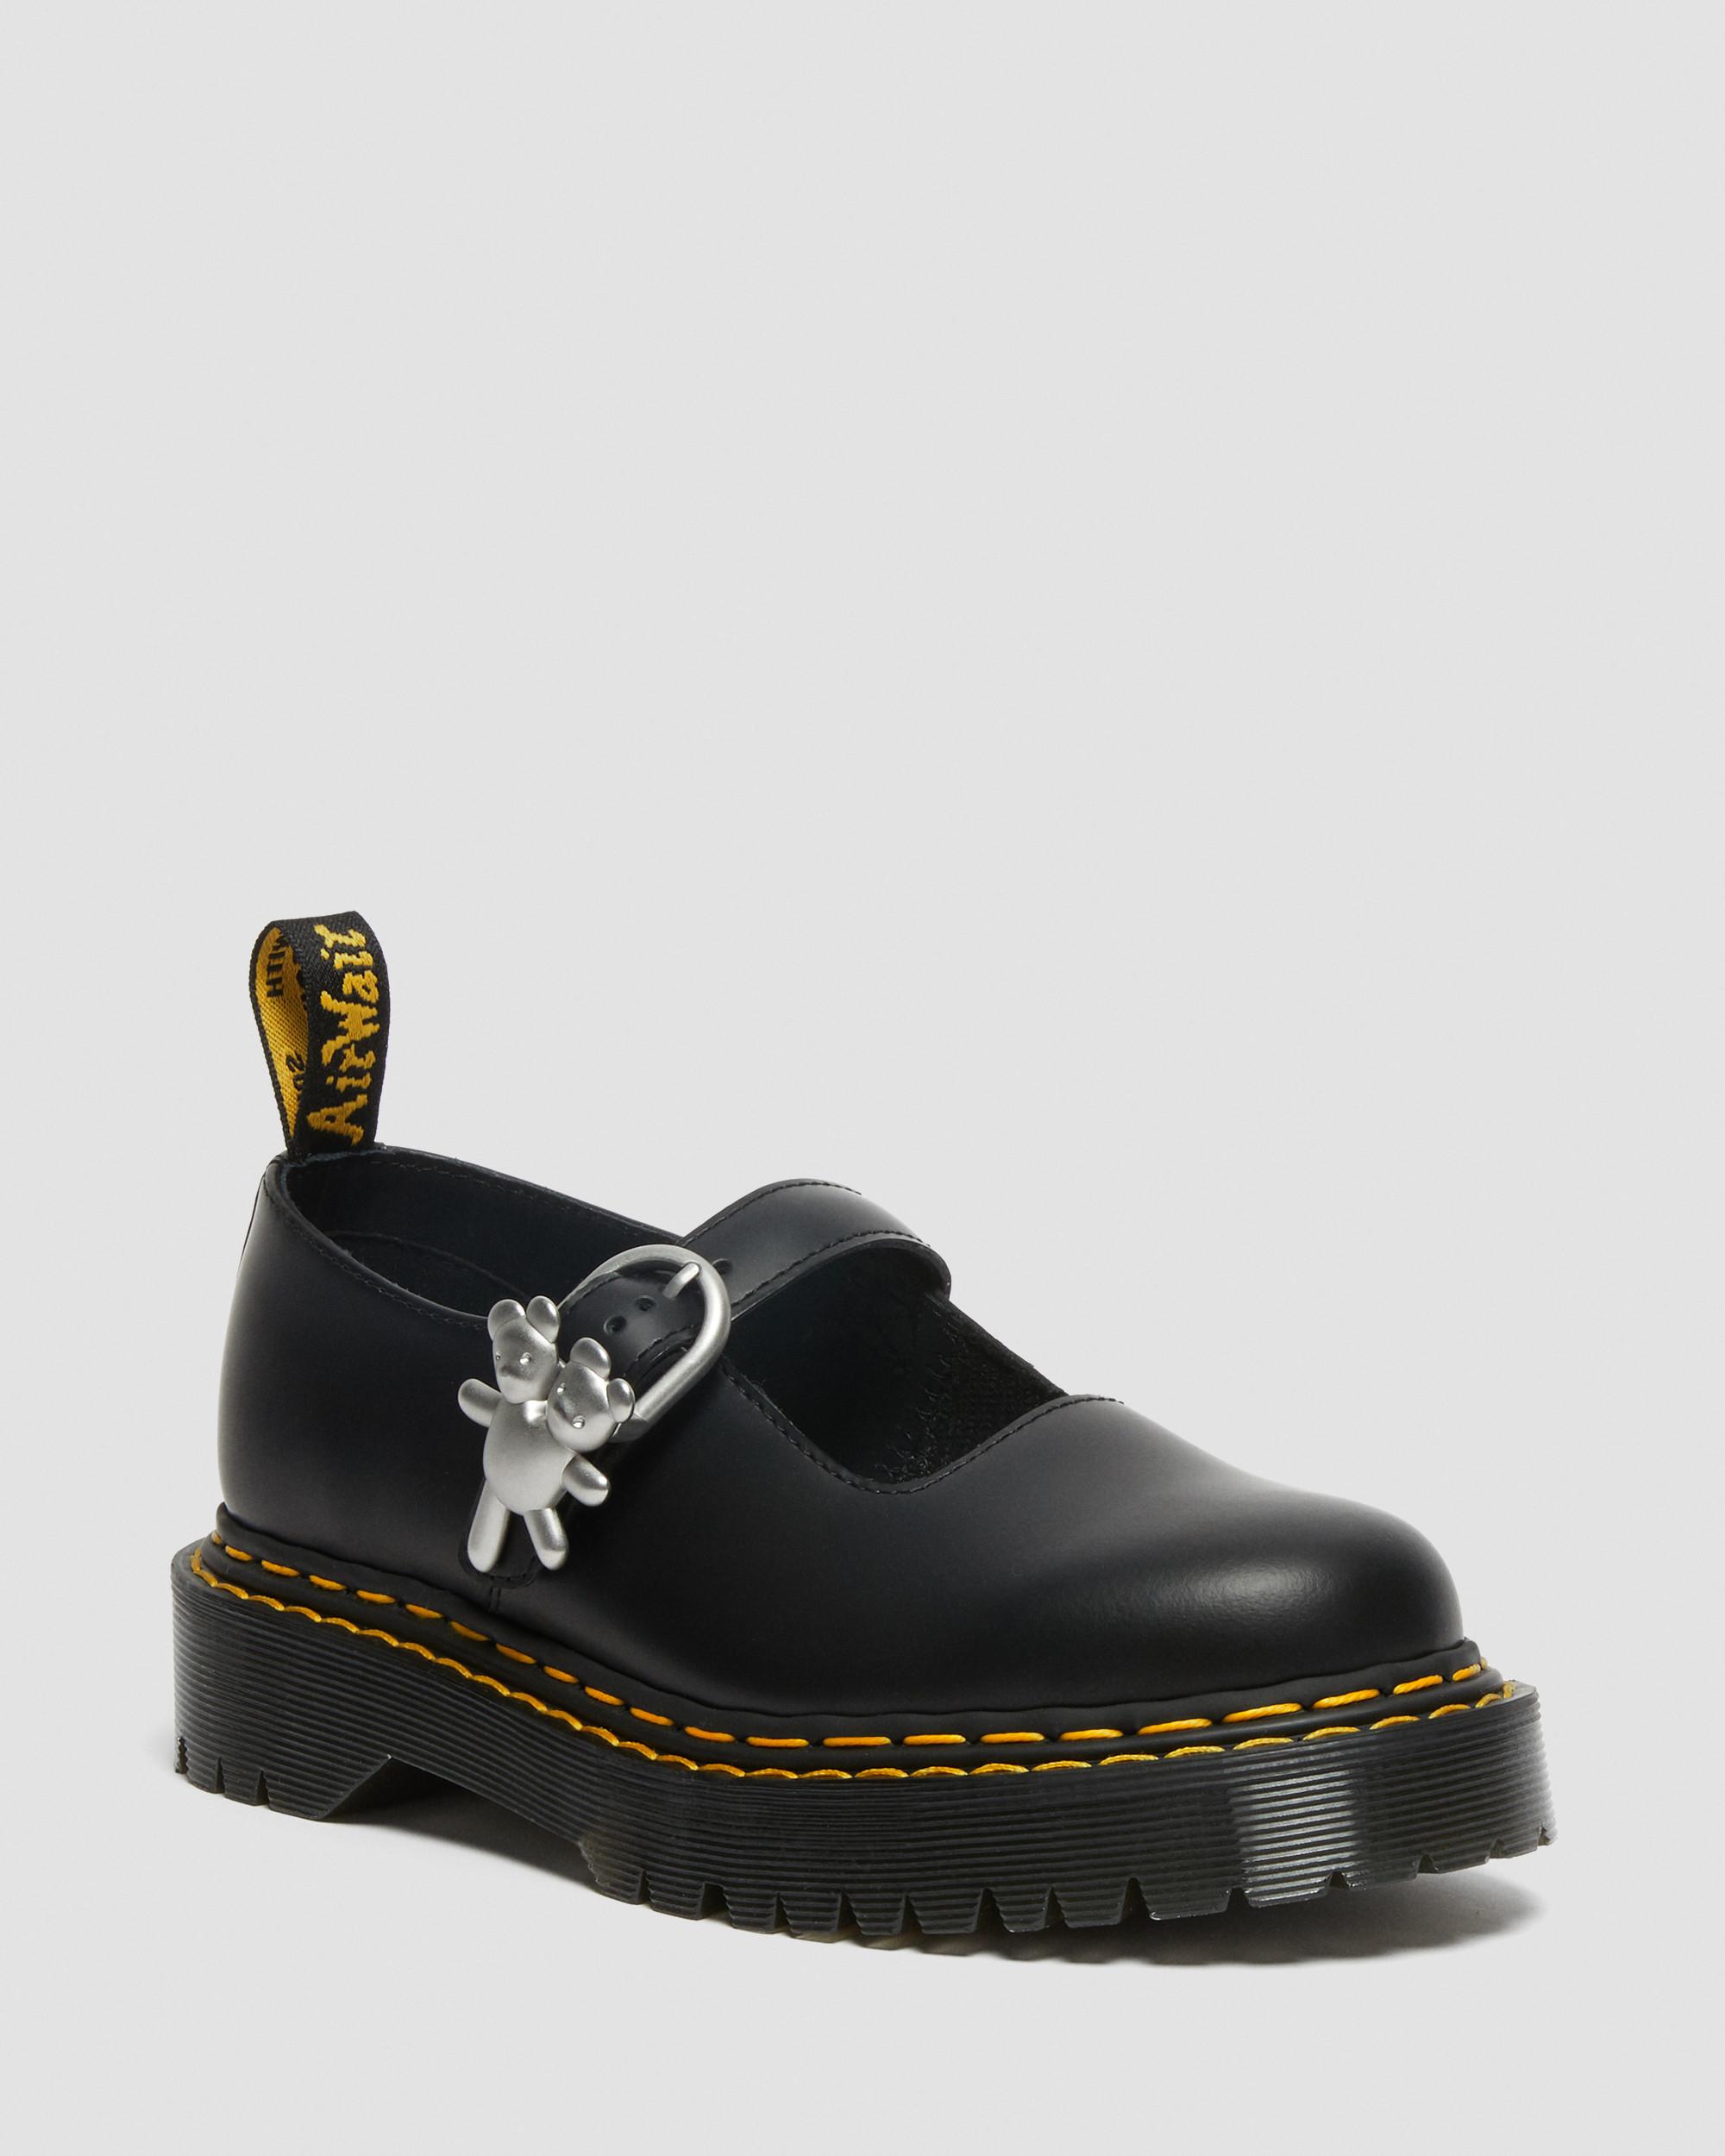 DR MARTENS ADDINA HEAVEN BY MJ BEX SHOES